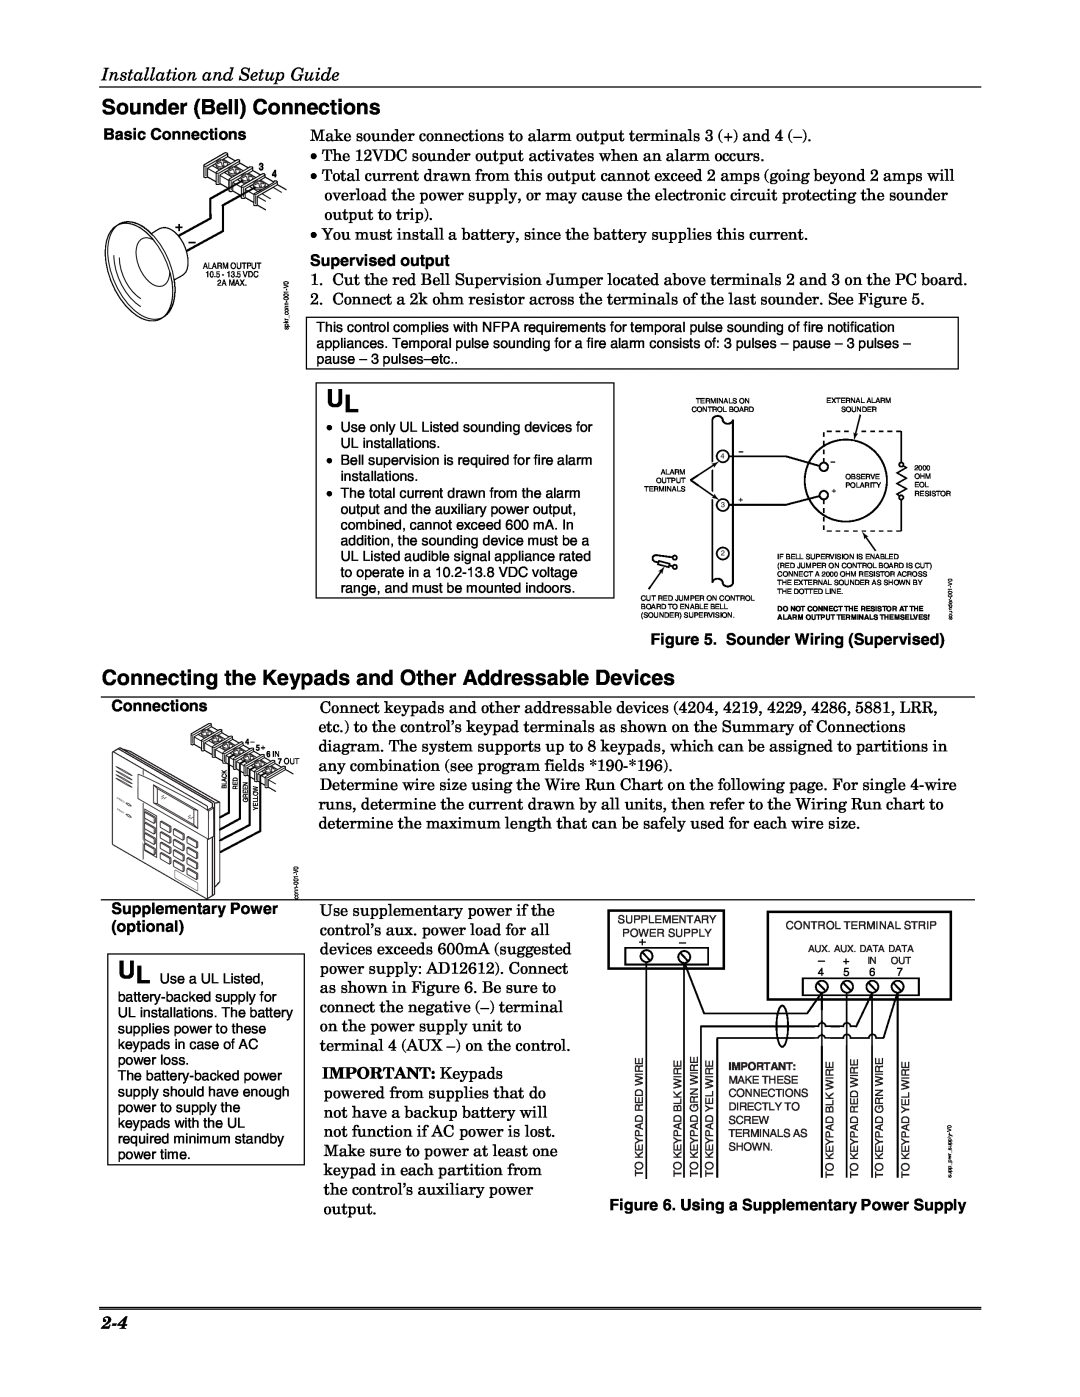 Honeywell K5305-1V5 Sounder Bell Connections, Installation and Setup Guide, Basic Connections, Supervised output 